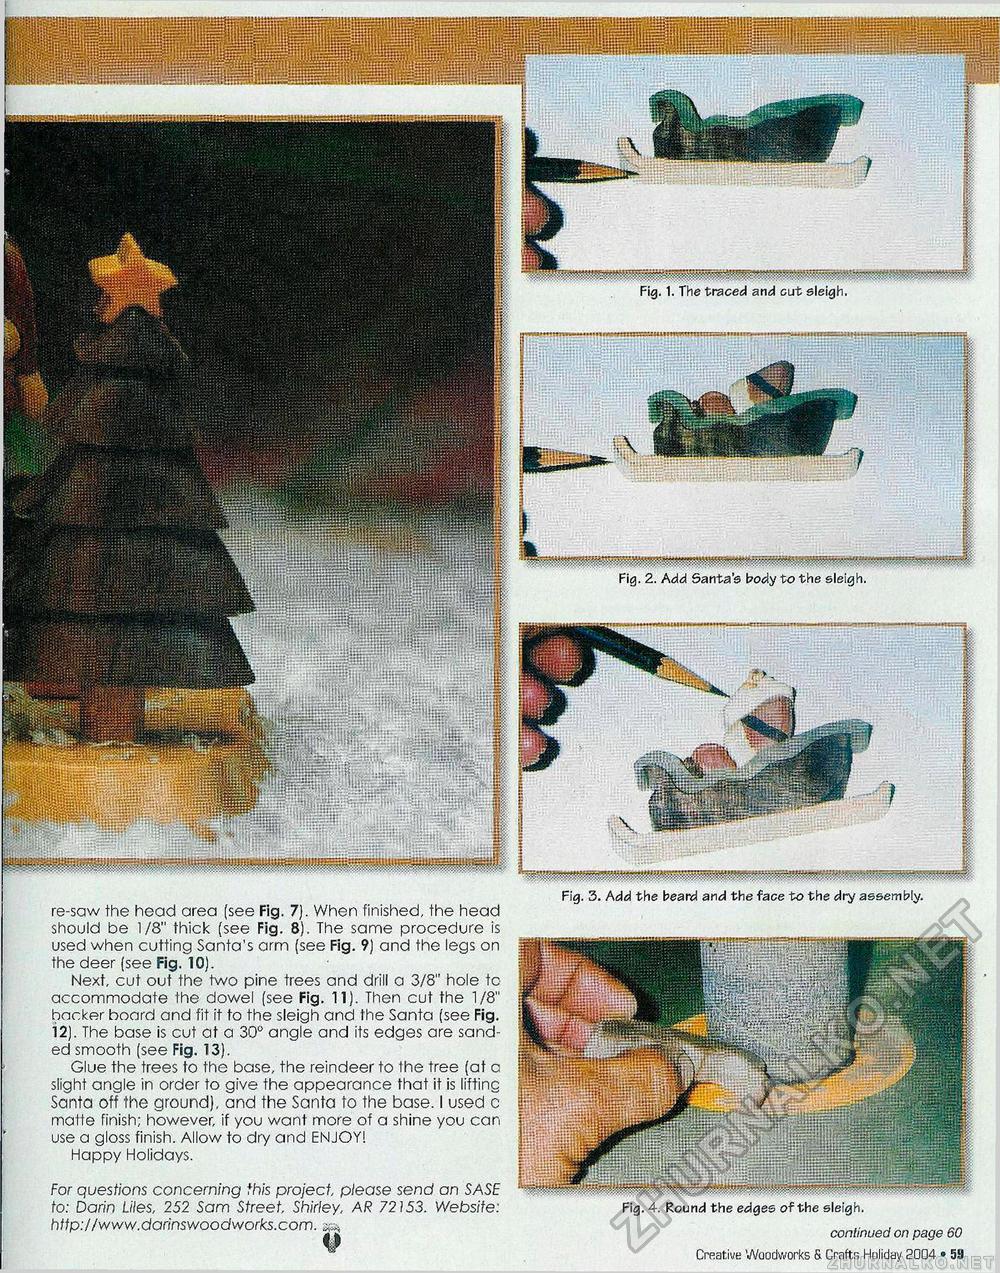 Creative Woodworks  & crafts-103-2004-Holiday,  59